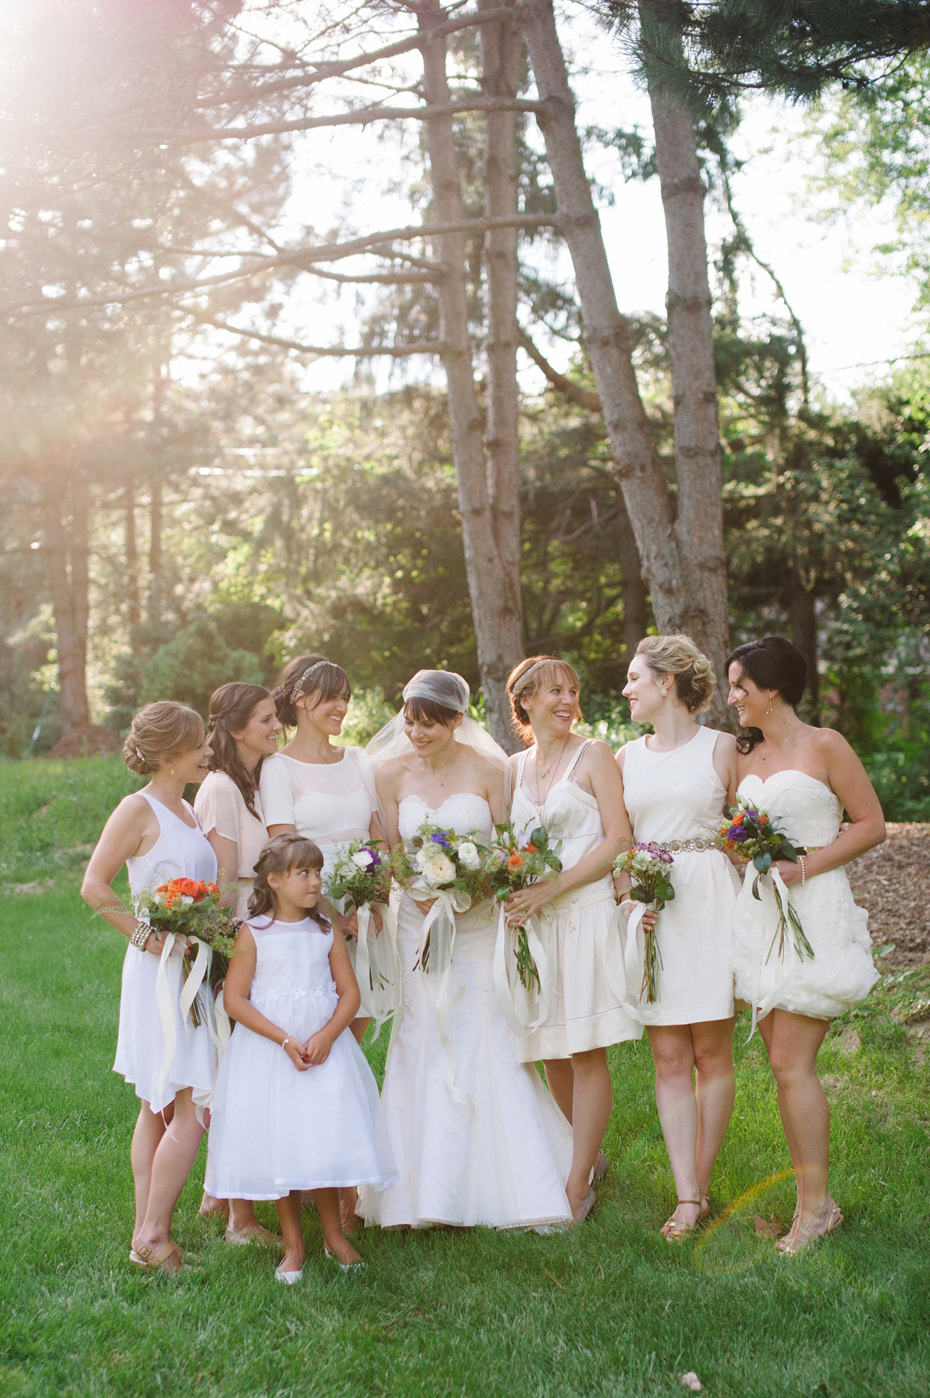 Bridesmaids with the bride and their vintage hand tied bouquets by Detroit Michigan wedding photographer, Heather Jowett.